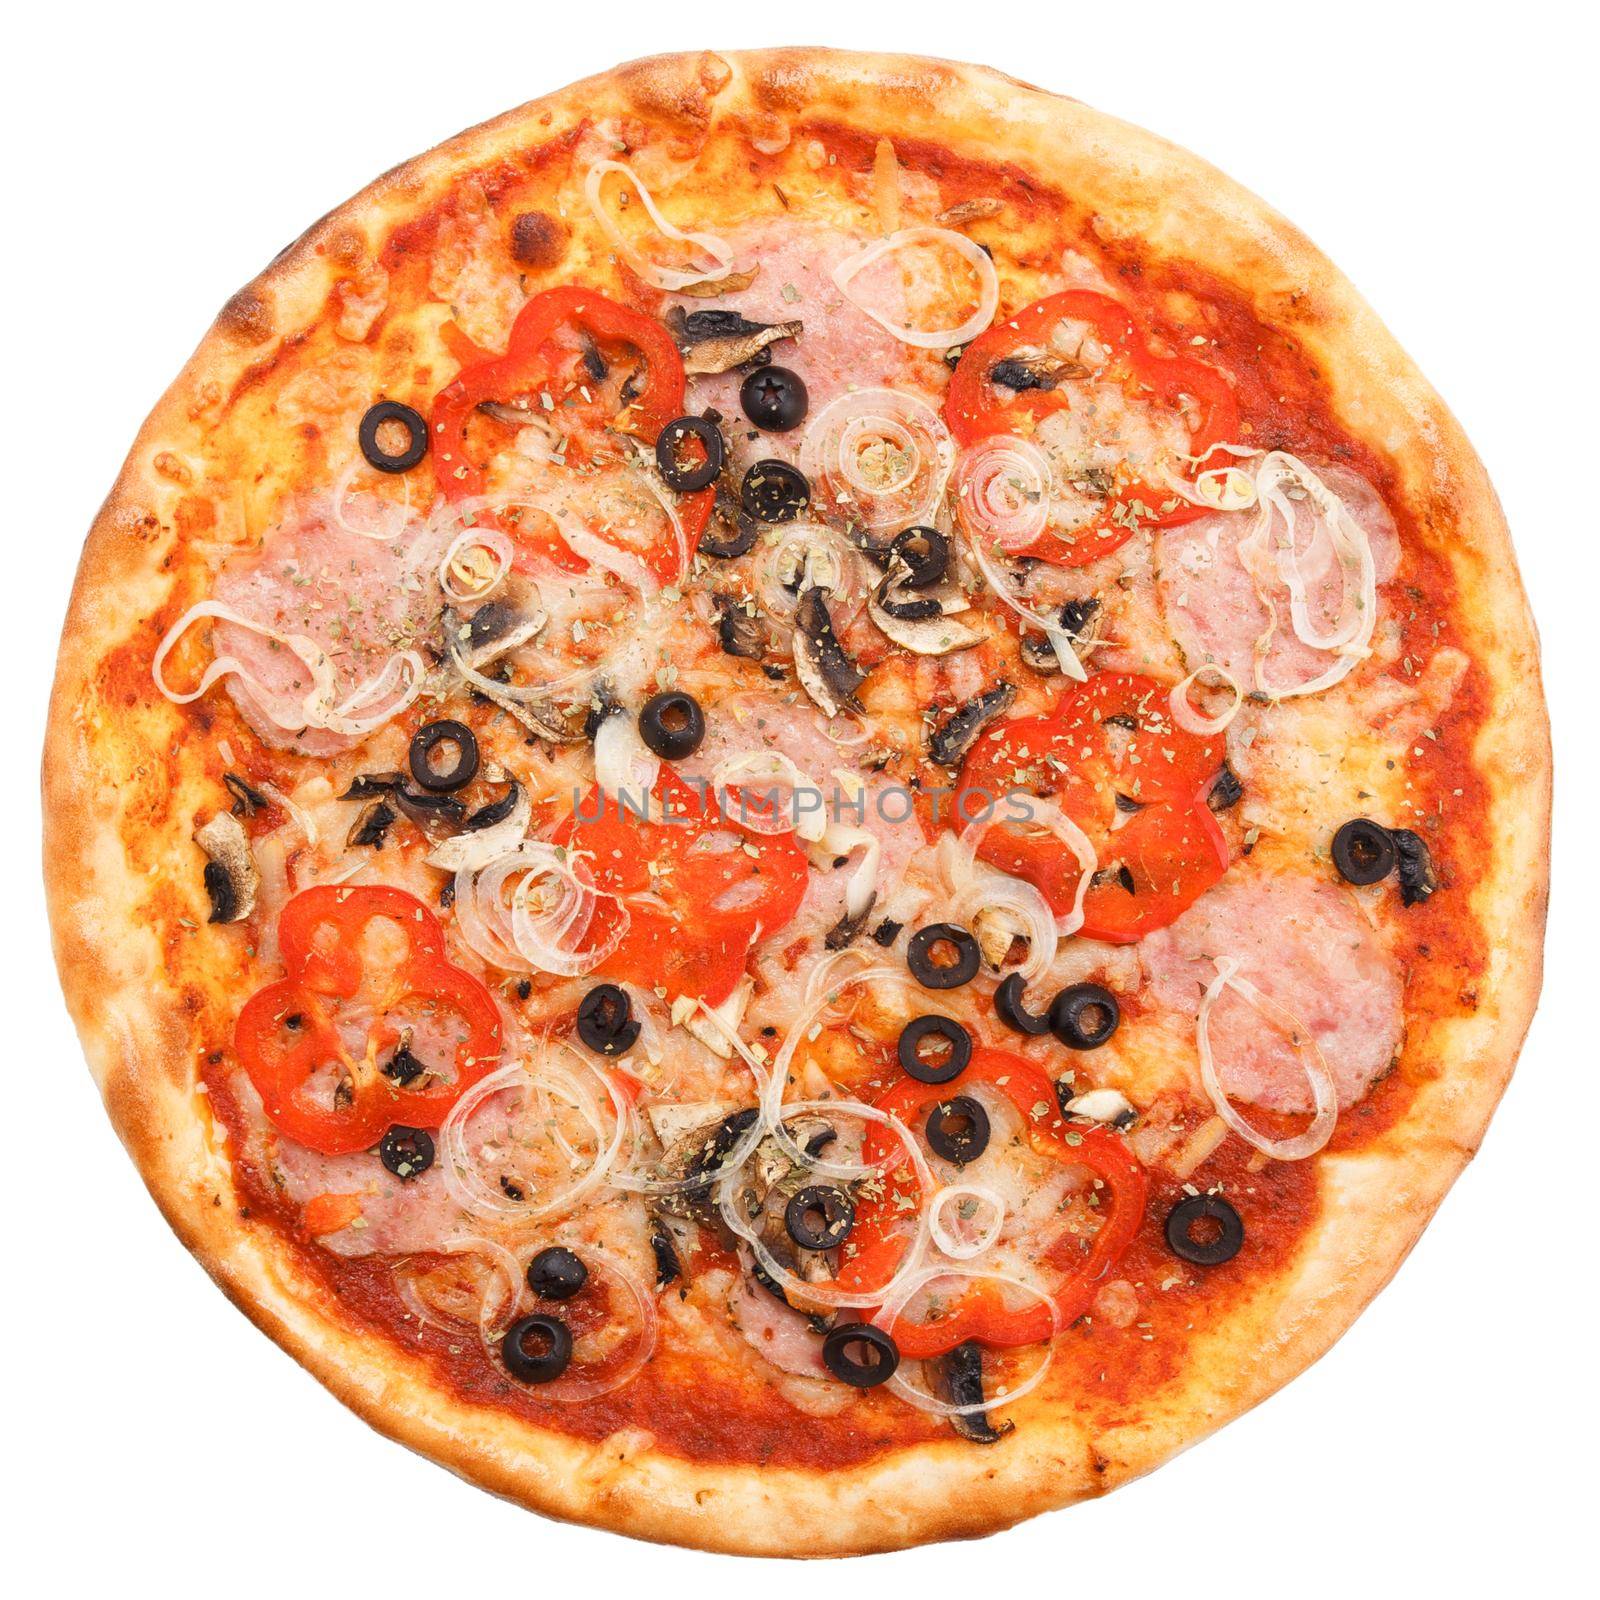 Classic Italian pizza with ham, bell peppers, olives and onions. Isolated on white background. Top view.